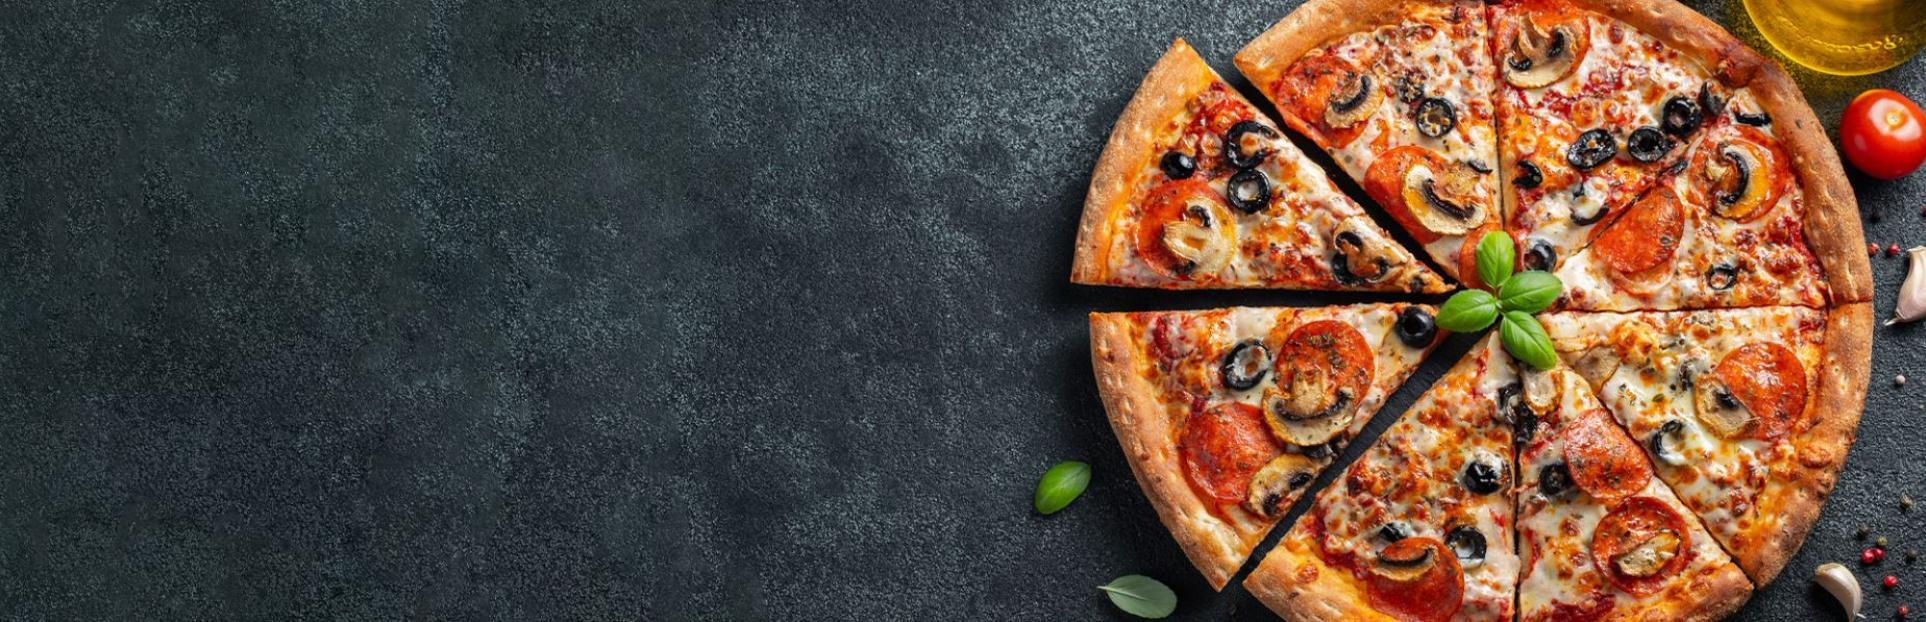 innovations in frozen pizza glanbia nutritionals